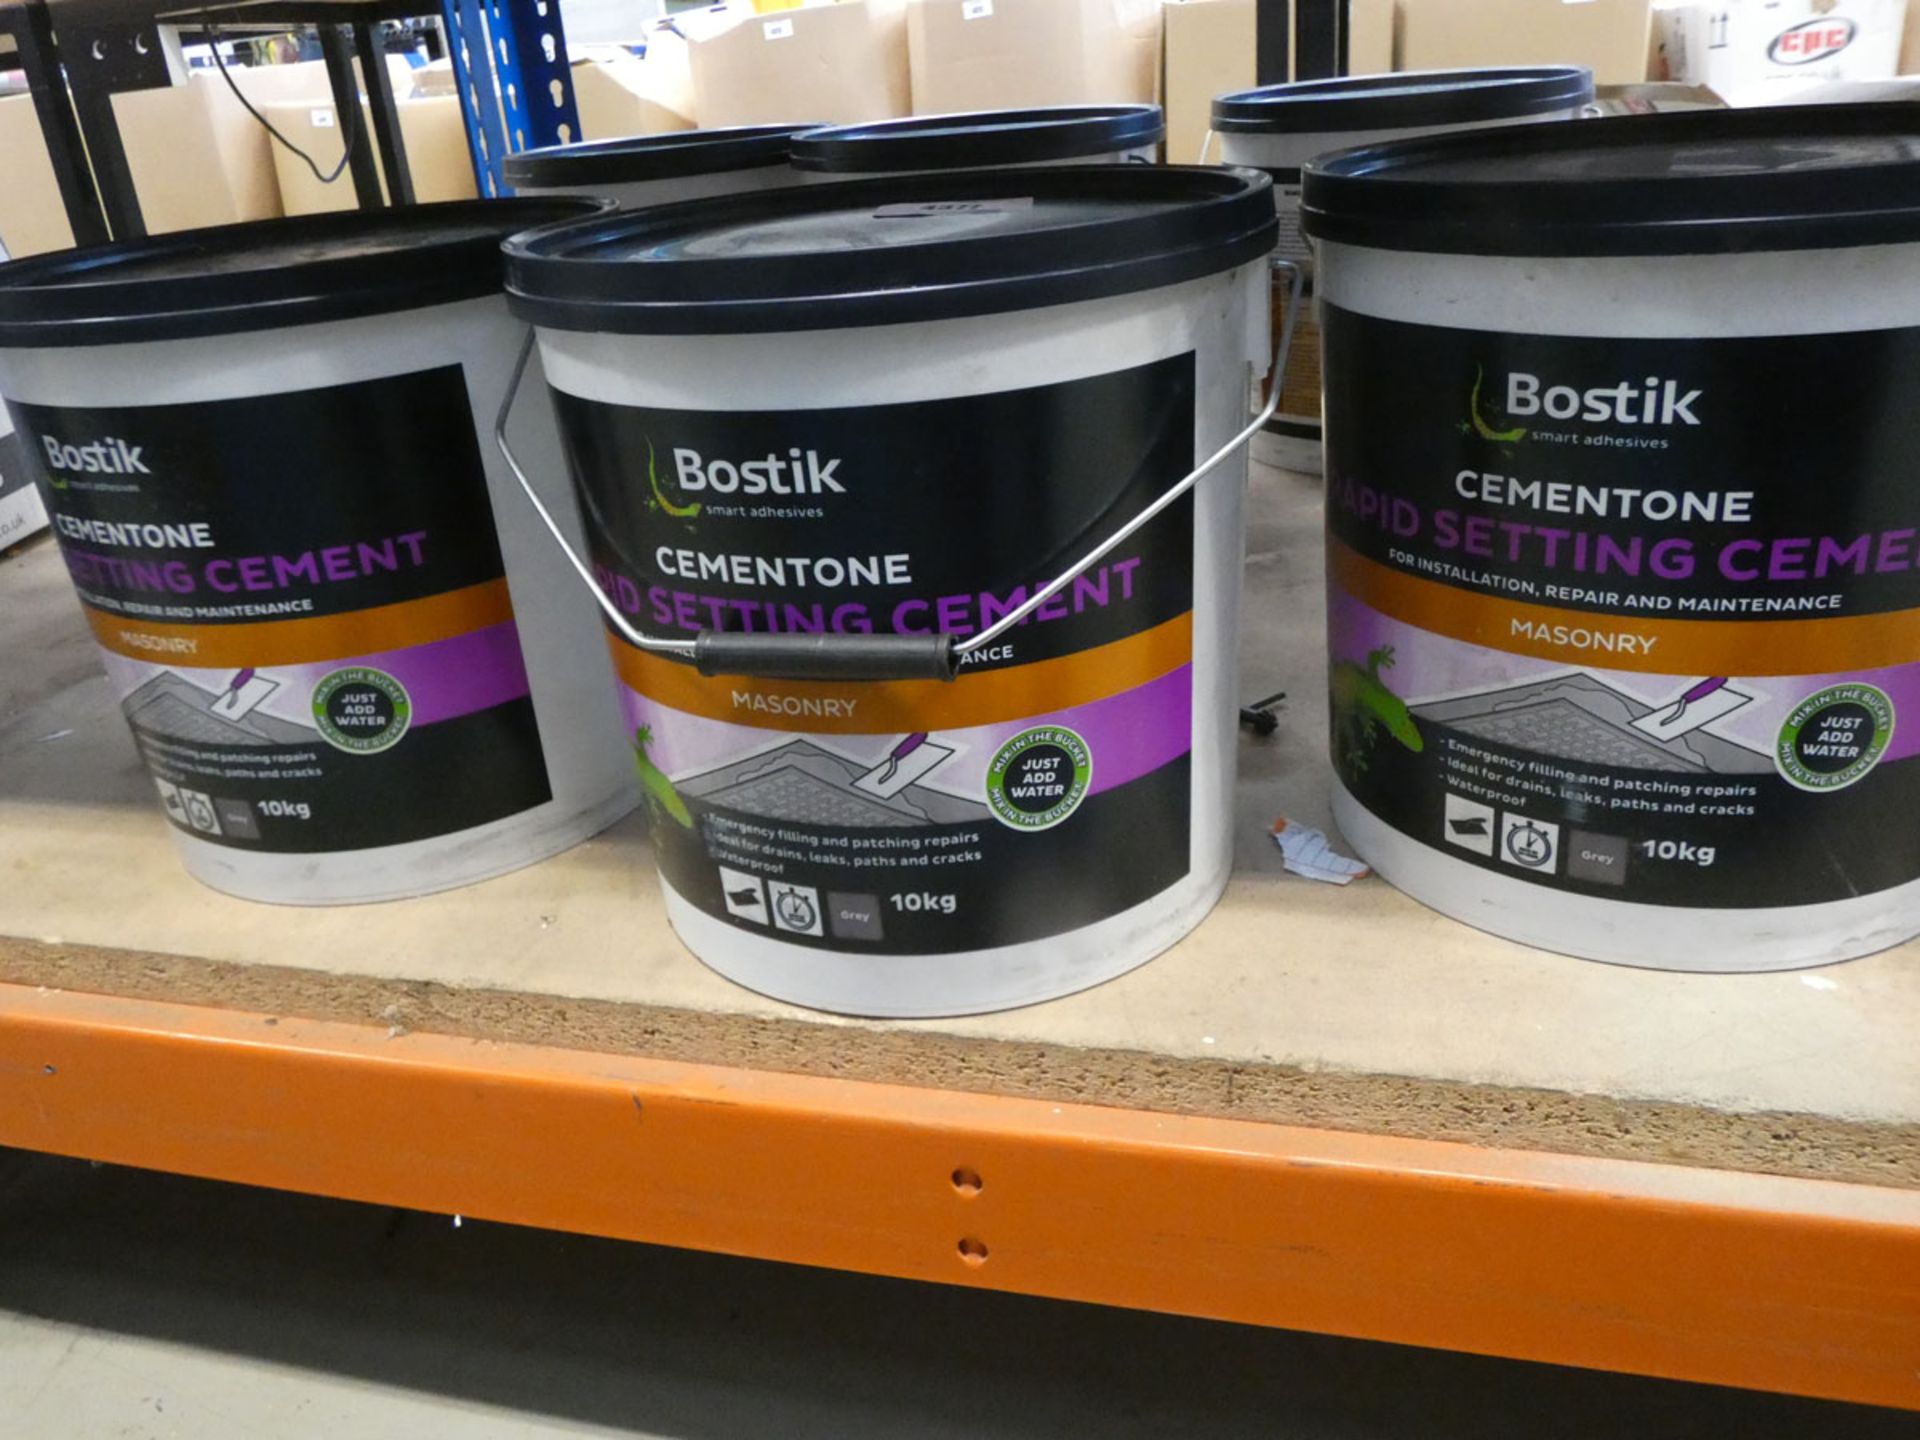 3 tubs of Bostik rapid setting cement